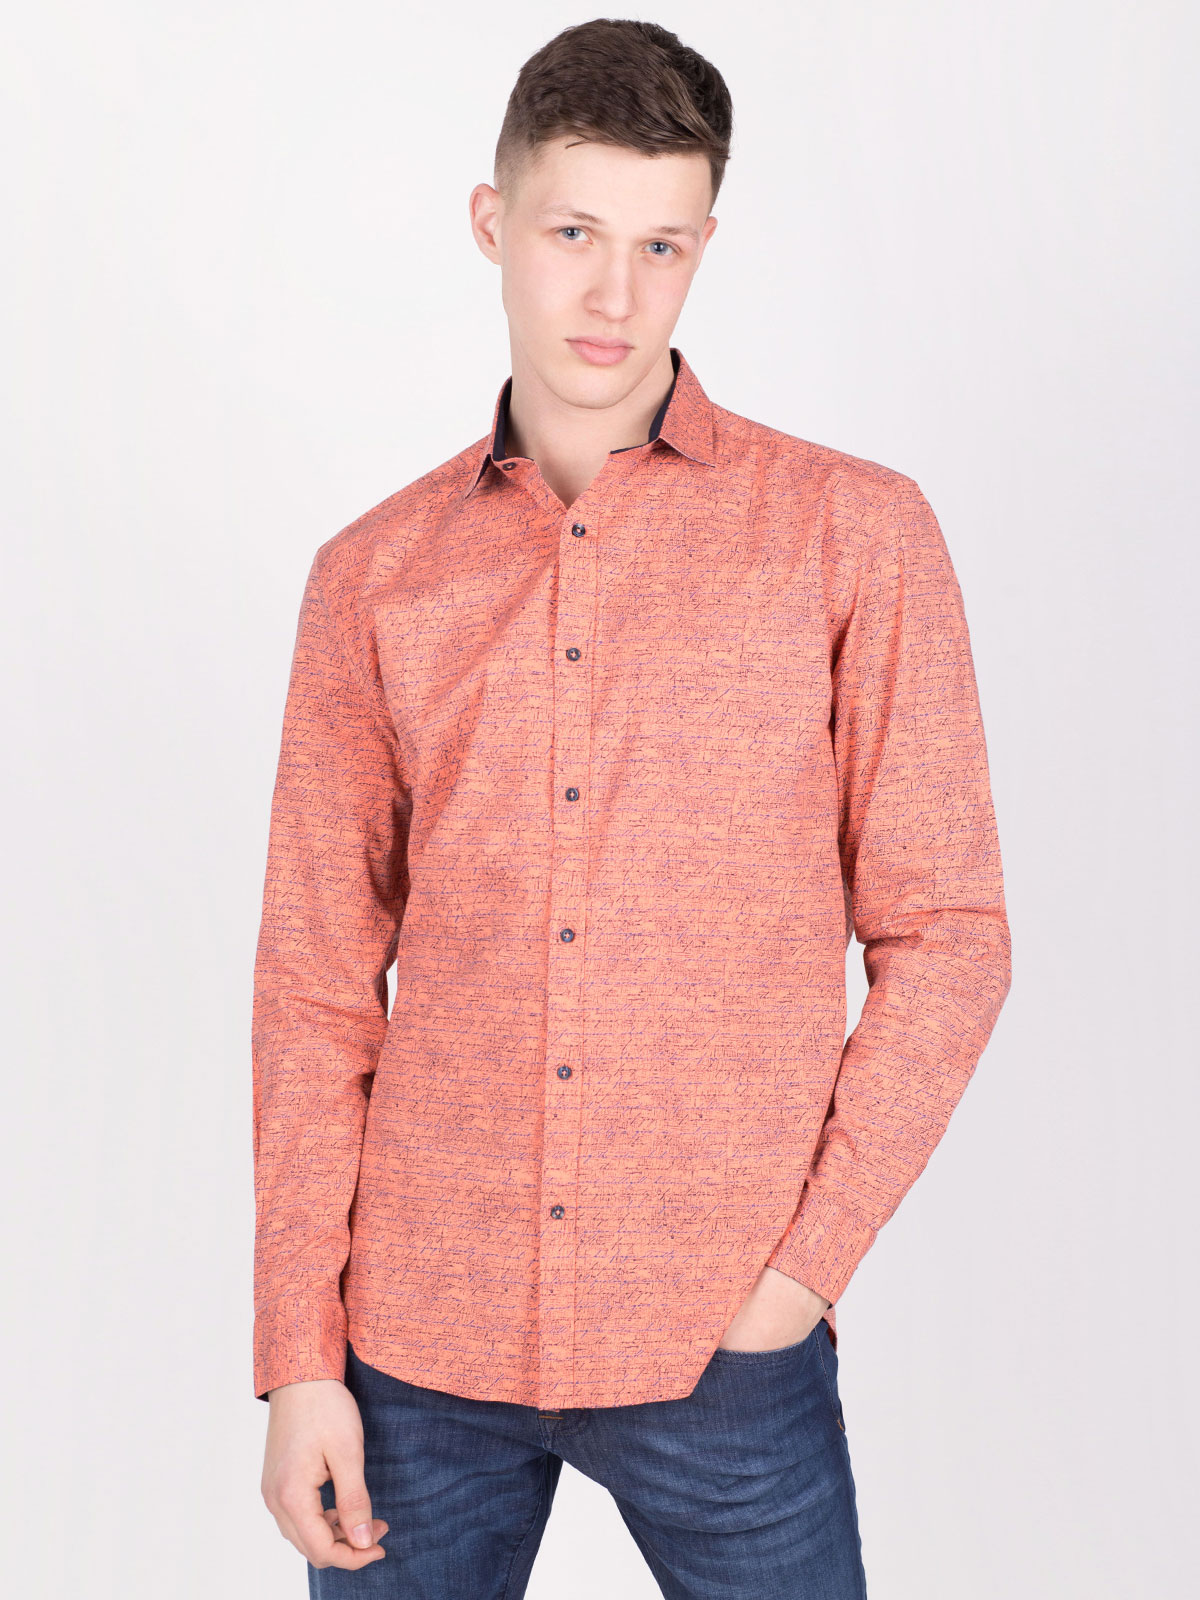  shirt in orange with spectacular print  - 21466 € 34.90 img1